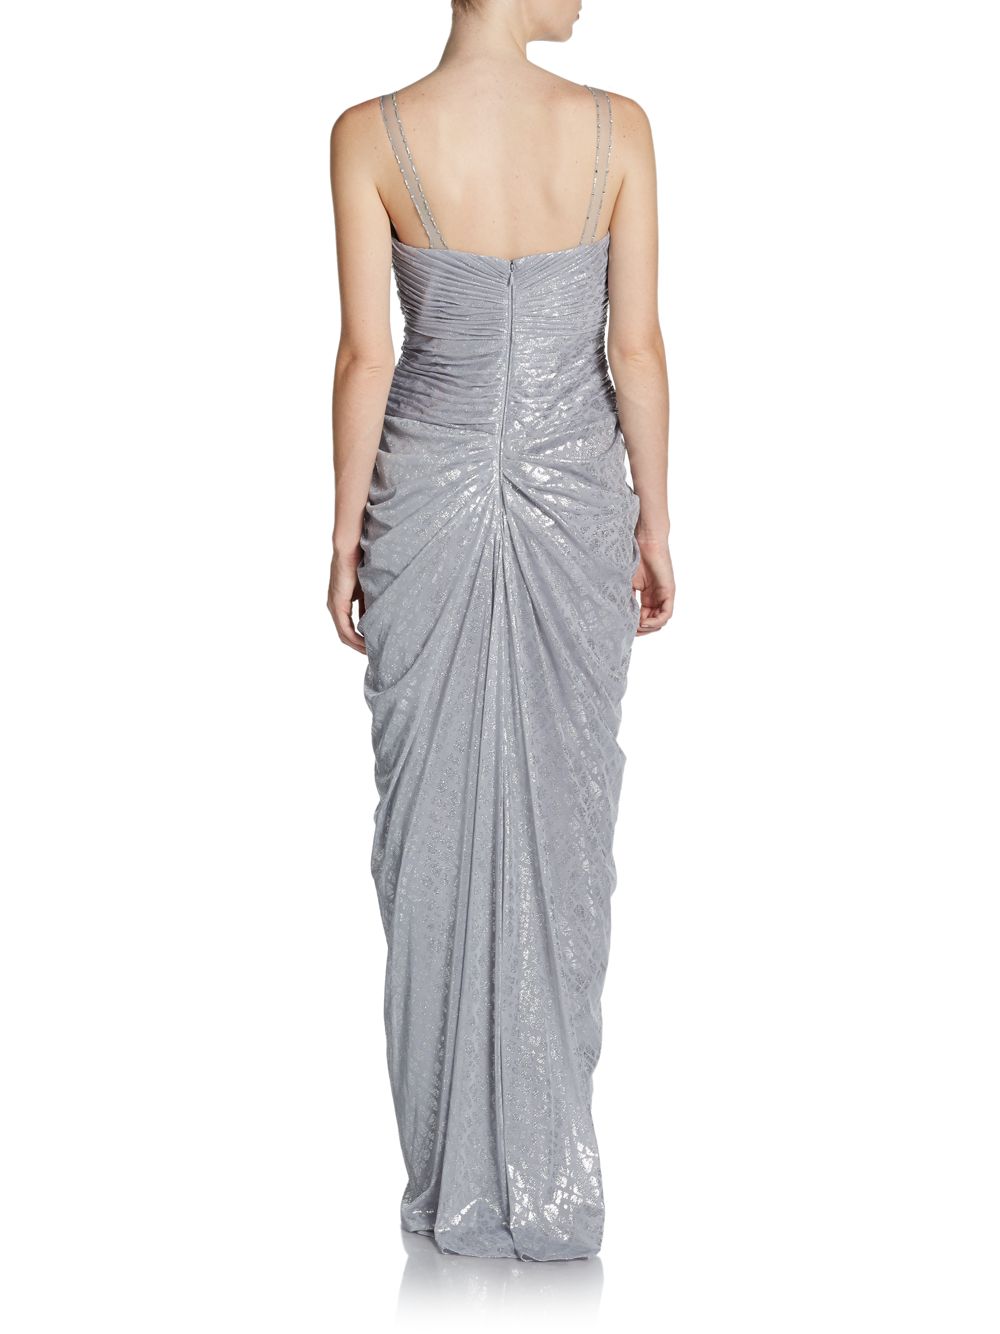 Lyst - Adrianna papell Beaded Metallic Foil Gown in Metallic